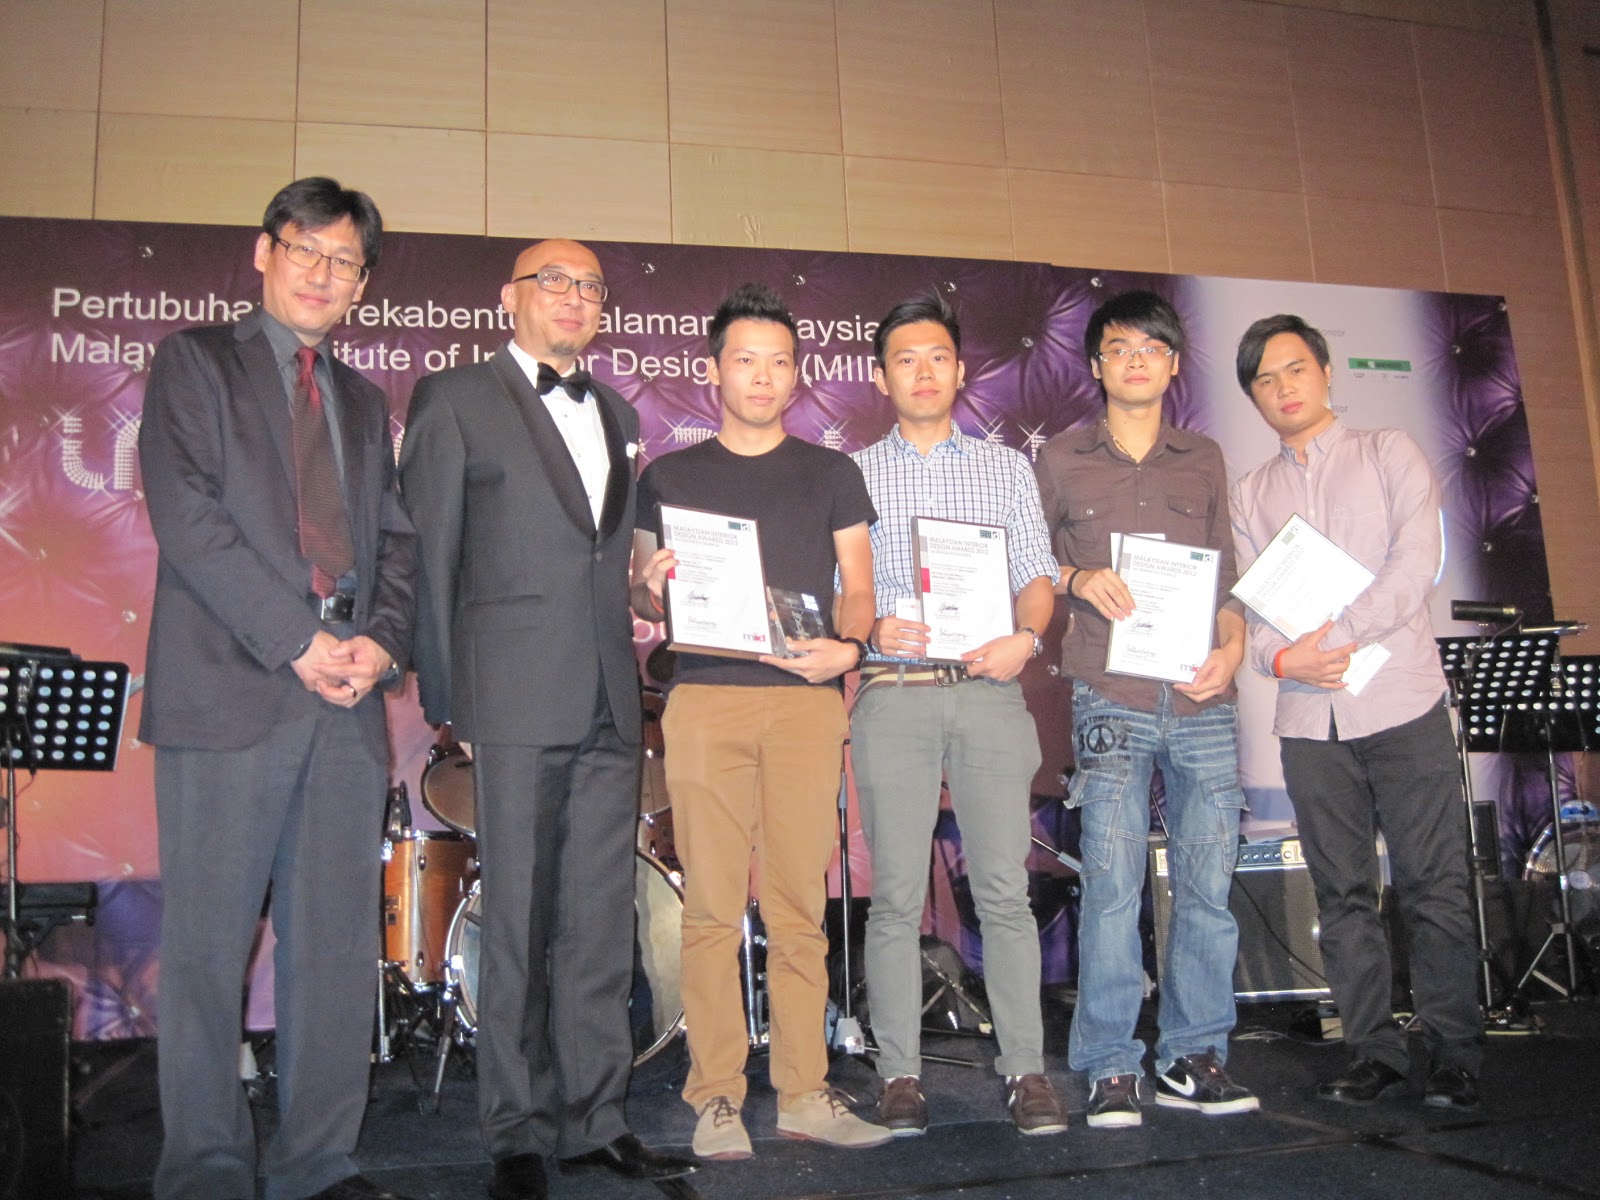 Lim Meng Yeu (Third from Right in black T-shirt), a graduate from KBU International College emerged as the Gold winner of the Student category of MIID’s MIDA Awards 2012 